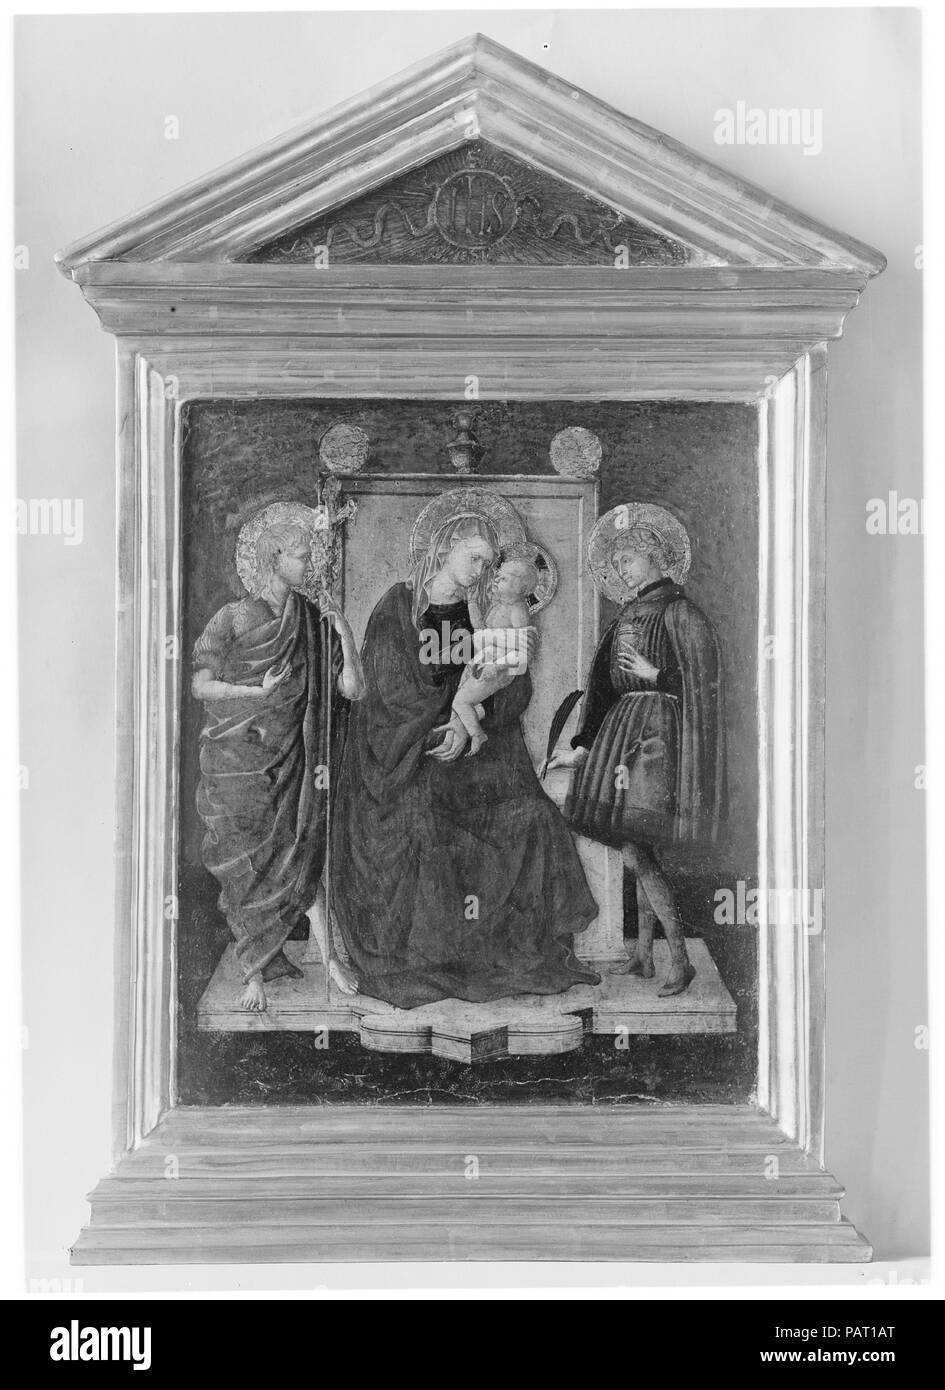 Madonna and Child Enthroned with Saint John the Baptist and Another Saint. Artist: Italian (Florentine) Painter (second quarter 15th century). Dimensions: Overall, with engaged frame, 29 3/4 x 17 1/8 in. (75.6 x 43.5 cm); painted surface 17 1/8 x 14 1/4 in. (43.5 x 36.2 cm).  Despite its generally poor condition, this is a work of considerable interest. The poses of the Virgin and Child are especially inventive. The picture was at one time attributed to Pesellino, but it has also been thought a Sienese work close to Domenico di Bartolo. It is probably Florentine and dates around 1440. The fram Stock Photo